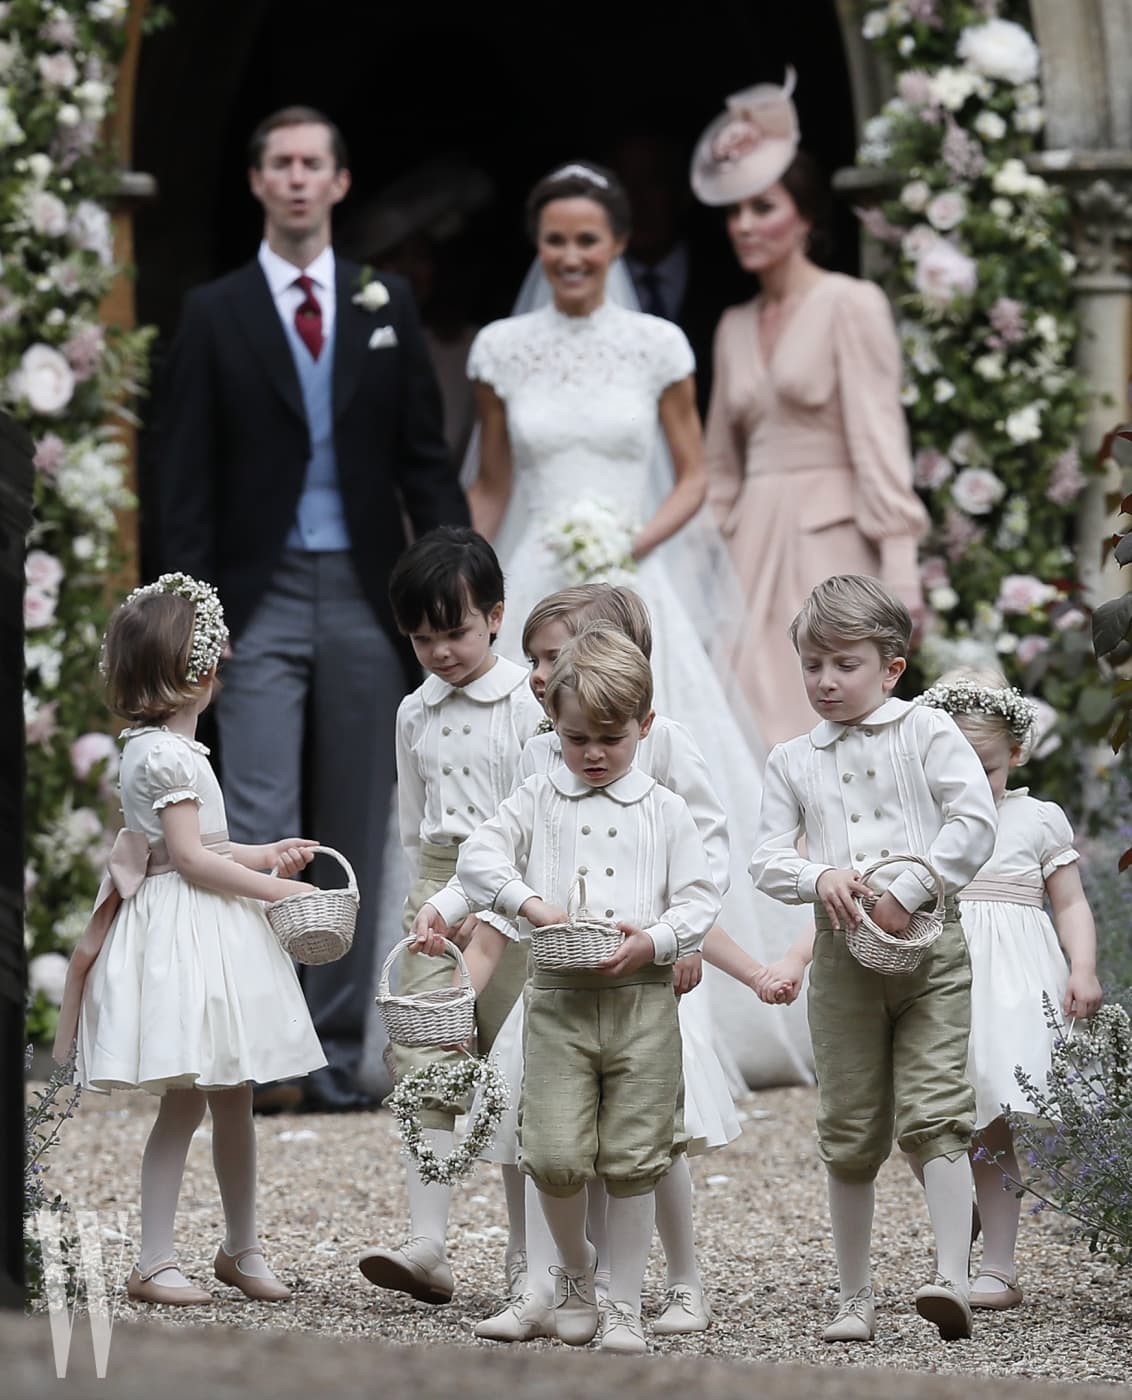 ENGLEFIELD, ENGLAND - MAY 20:  Prince George, center, stands with other flower boys and girls after the wedding of Pippa Middleton and James Matthews at St Mark's Church on May 20, 2017 in Englefield, England.Middleton, the sister of Catherine, Duchess of Cambridge married hedge fund manager James Matthews in a ceremony Saturday where her niece and nephew Prince George and Princess Charlotte was in the wedding party, along with sister Kate and princes Harry and William. (Photo by Kirsty Wigglesworth - Pool/Getty Images)